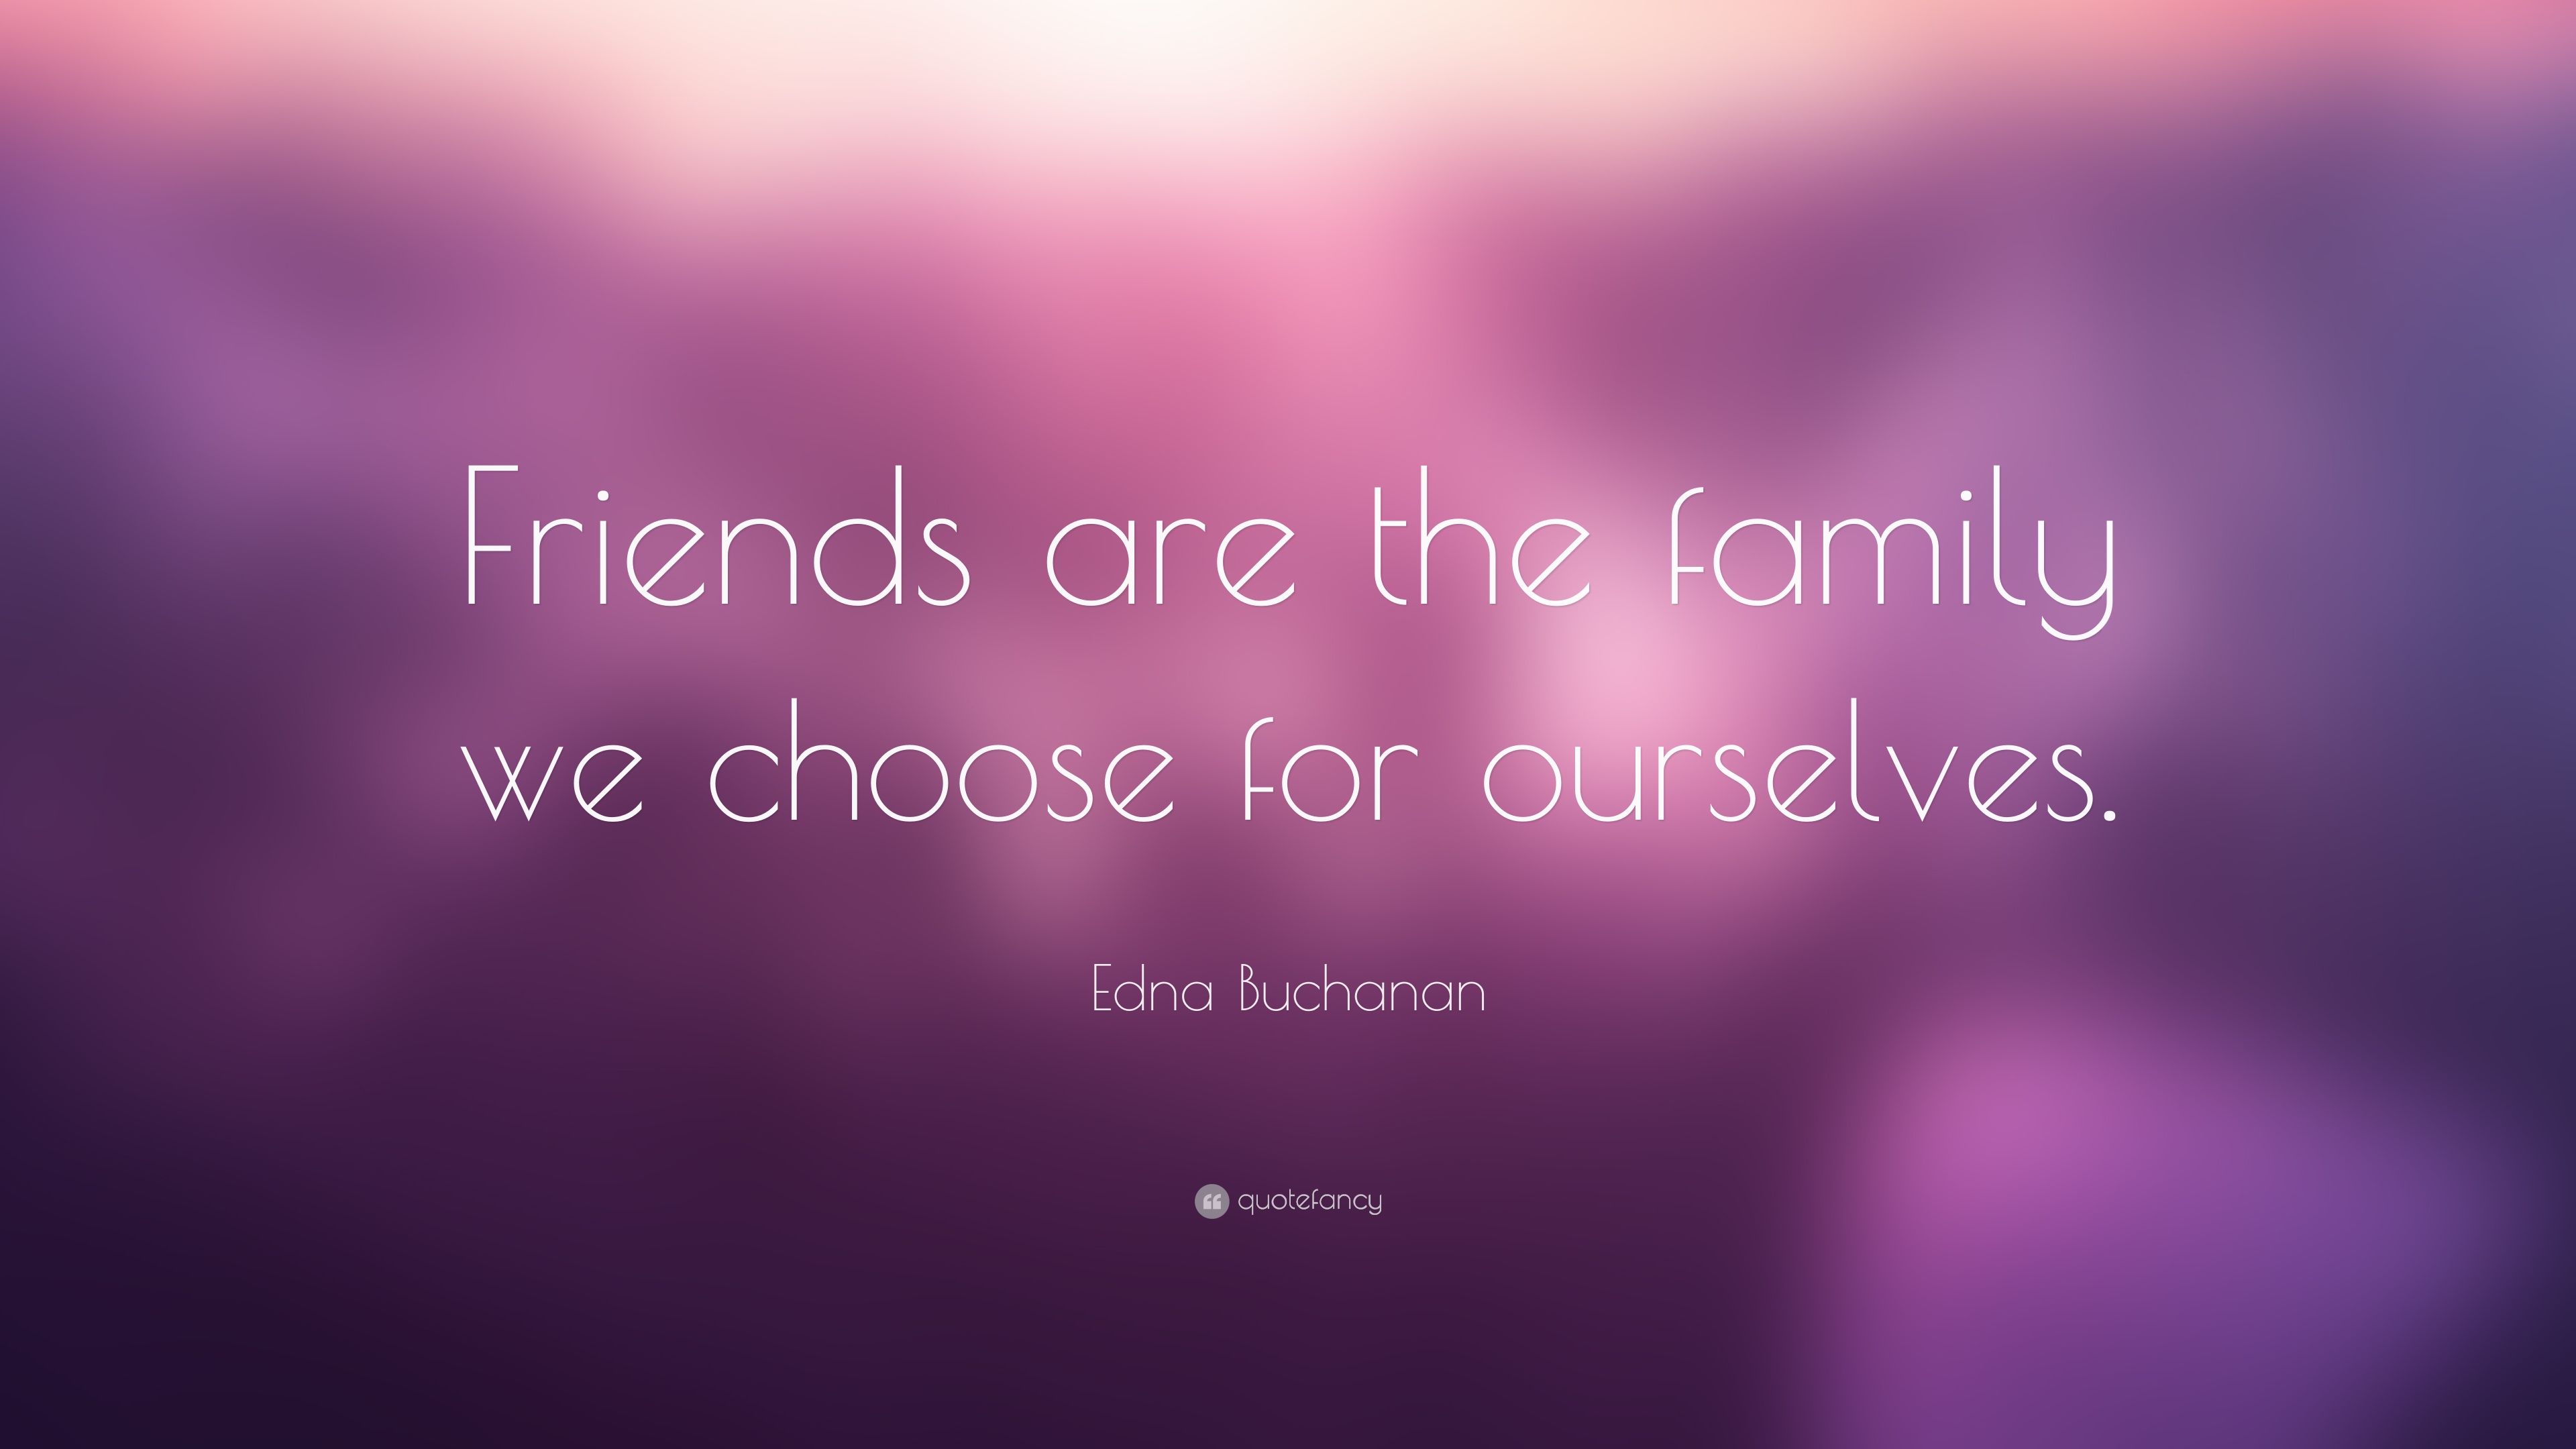 Edna Buchanan Quote: “Friends are the family we choose